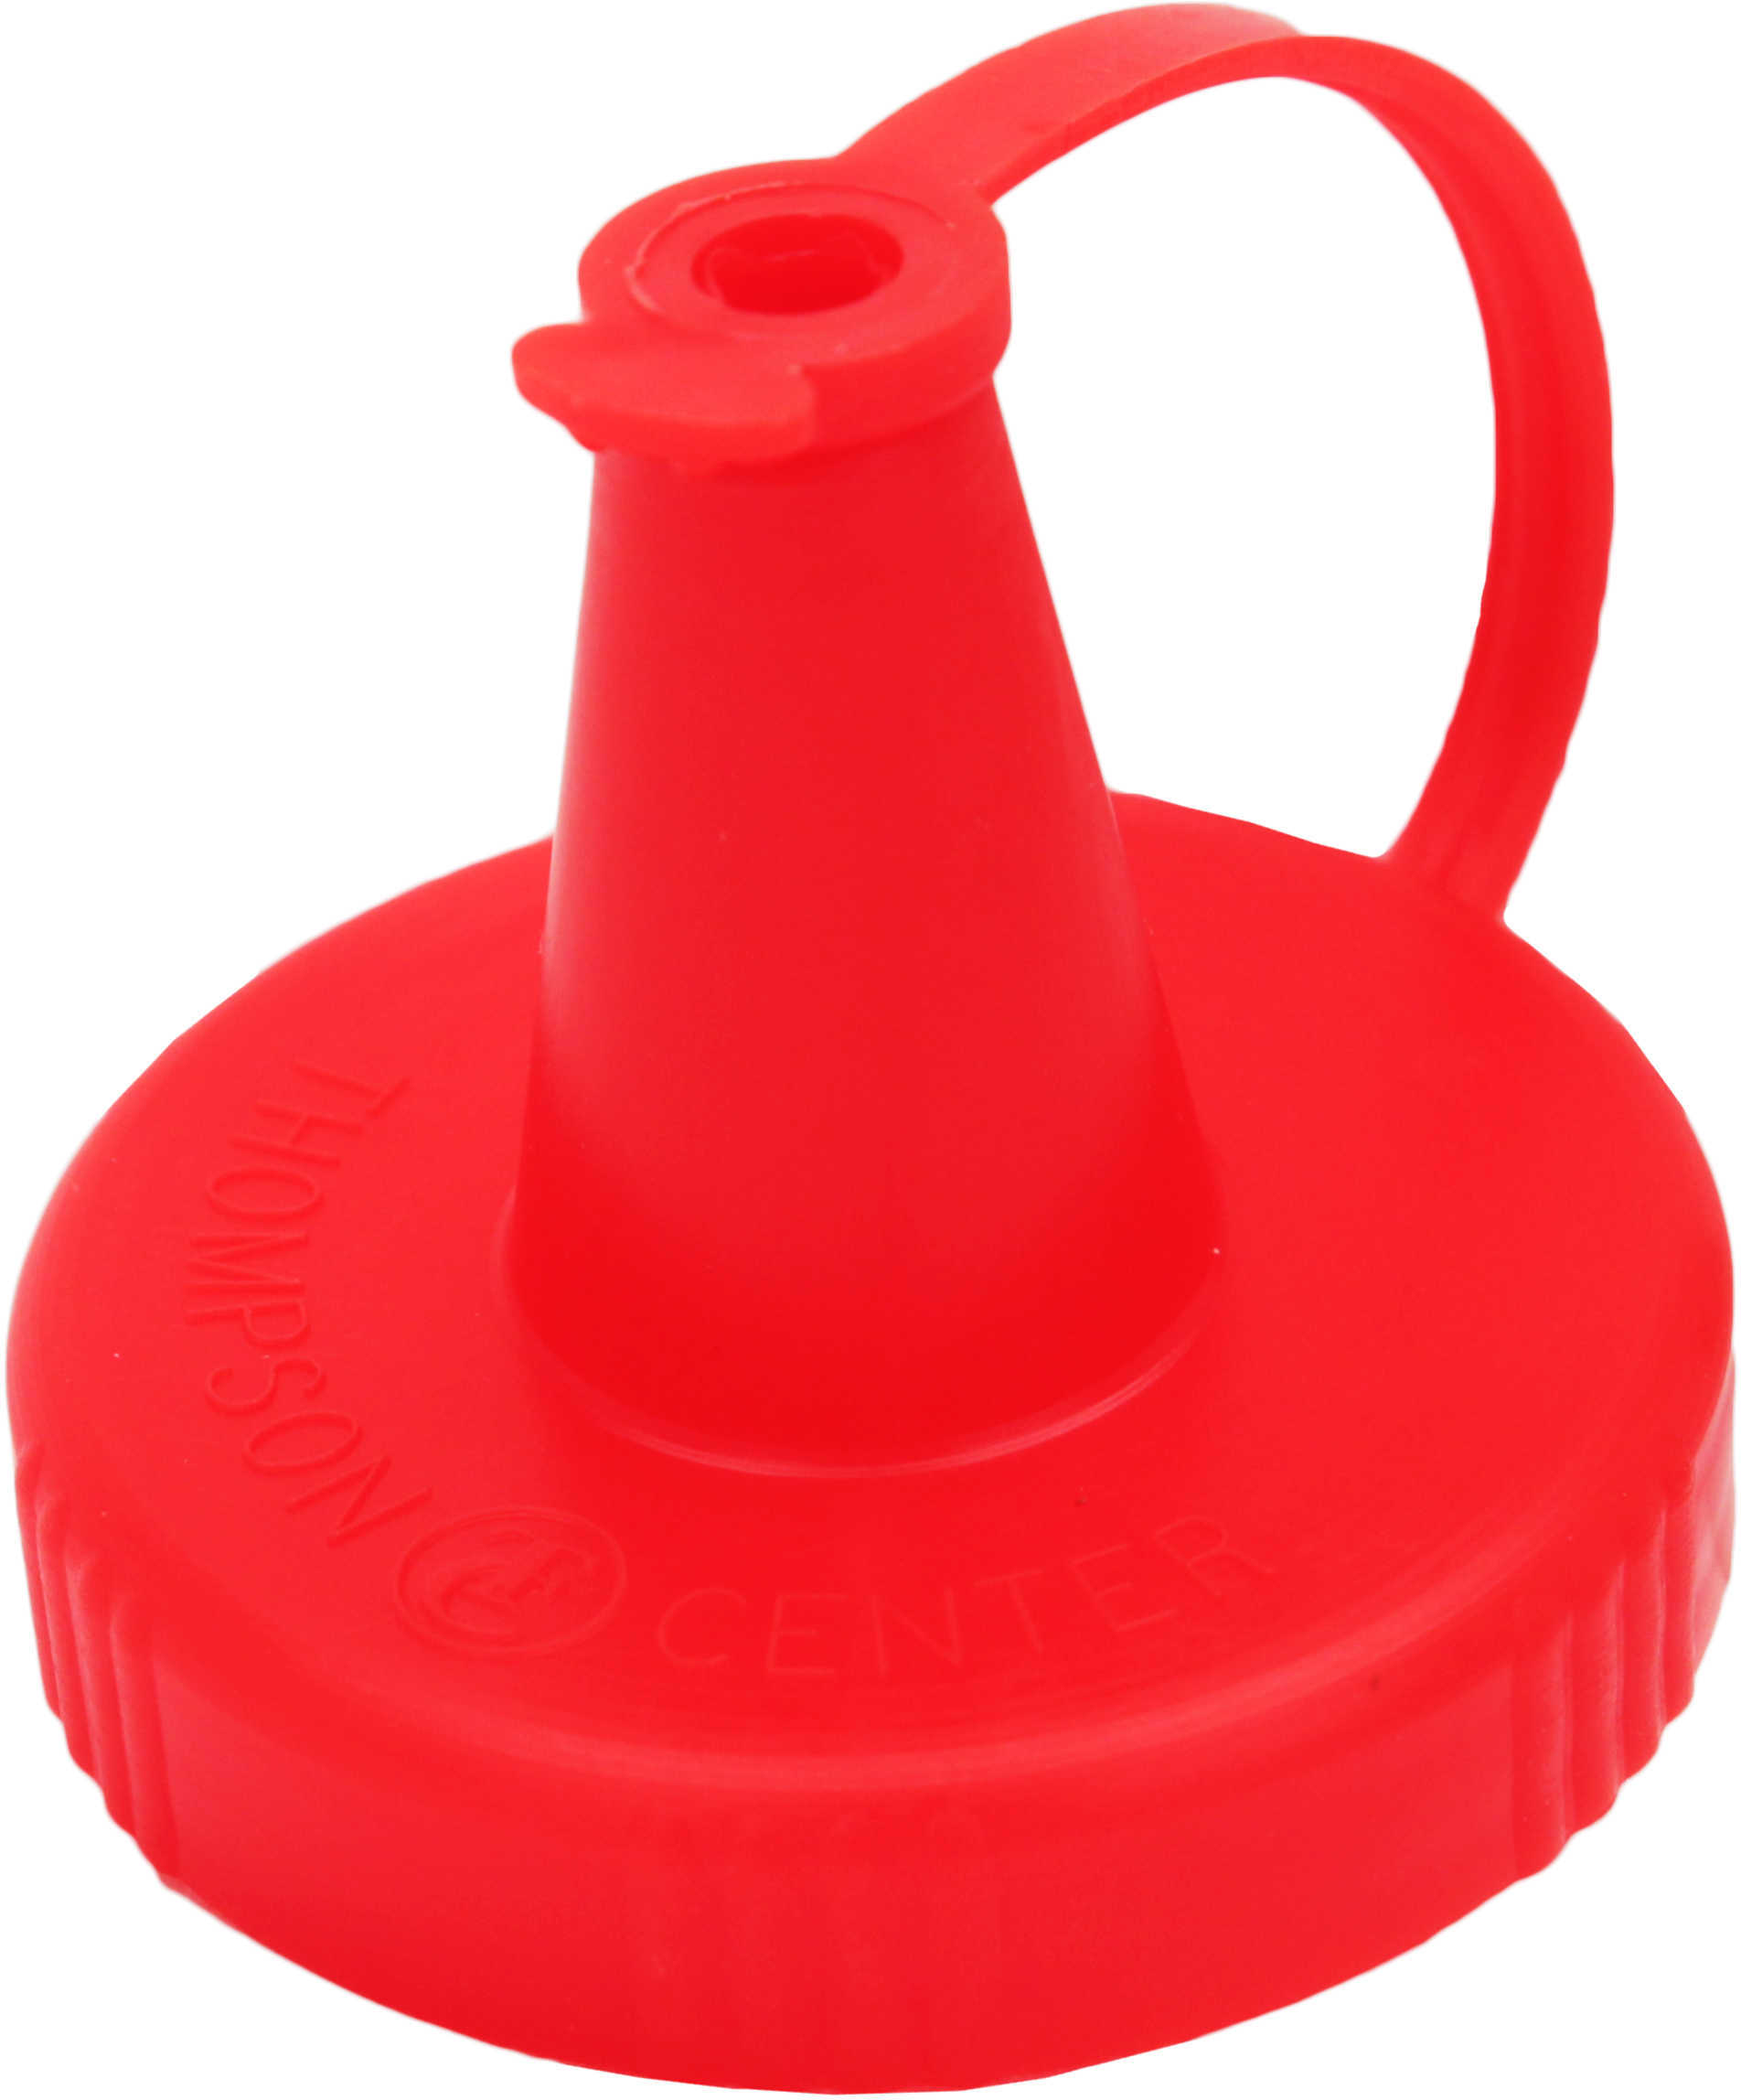 T/C Powder Spout For Pyrodex Container